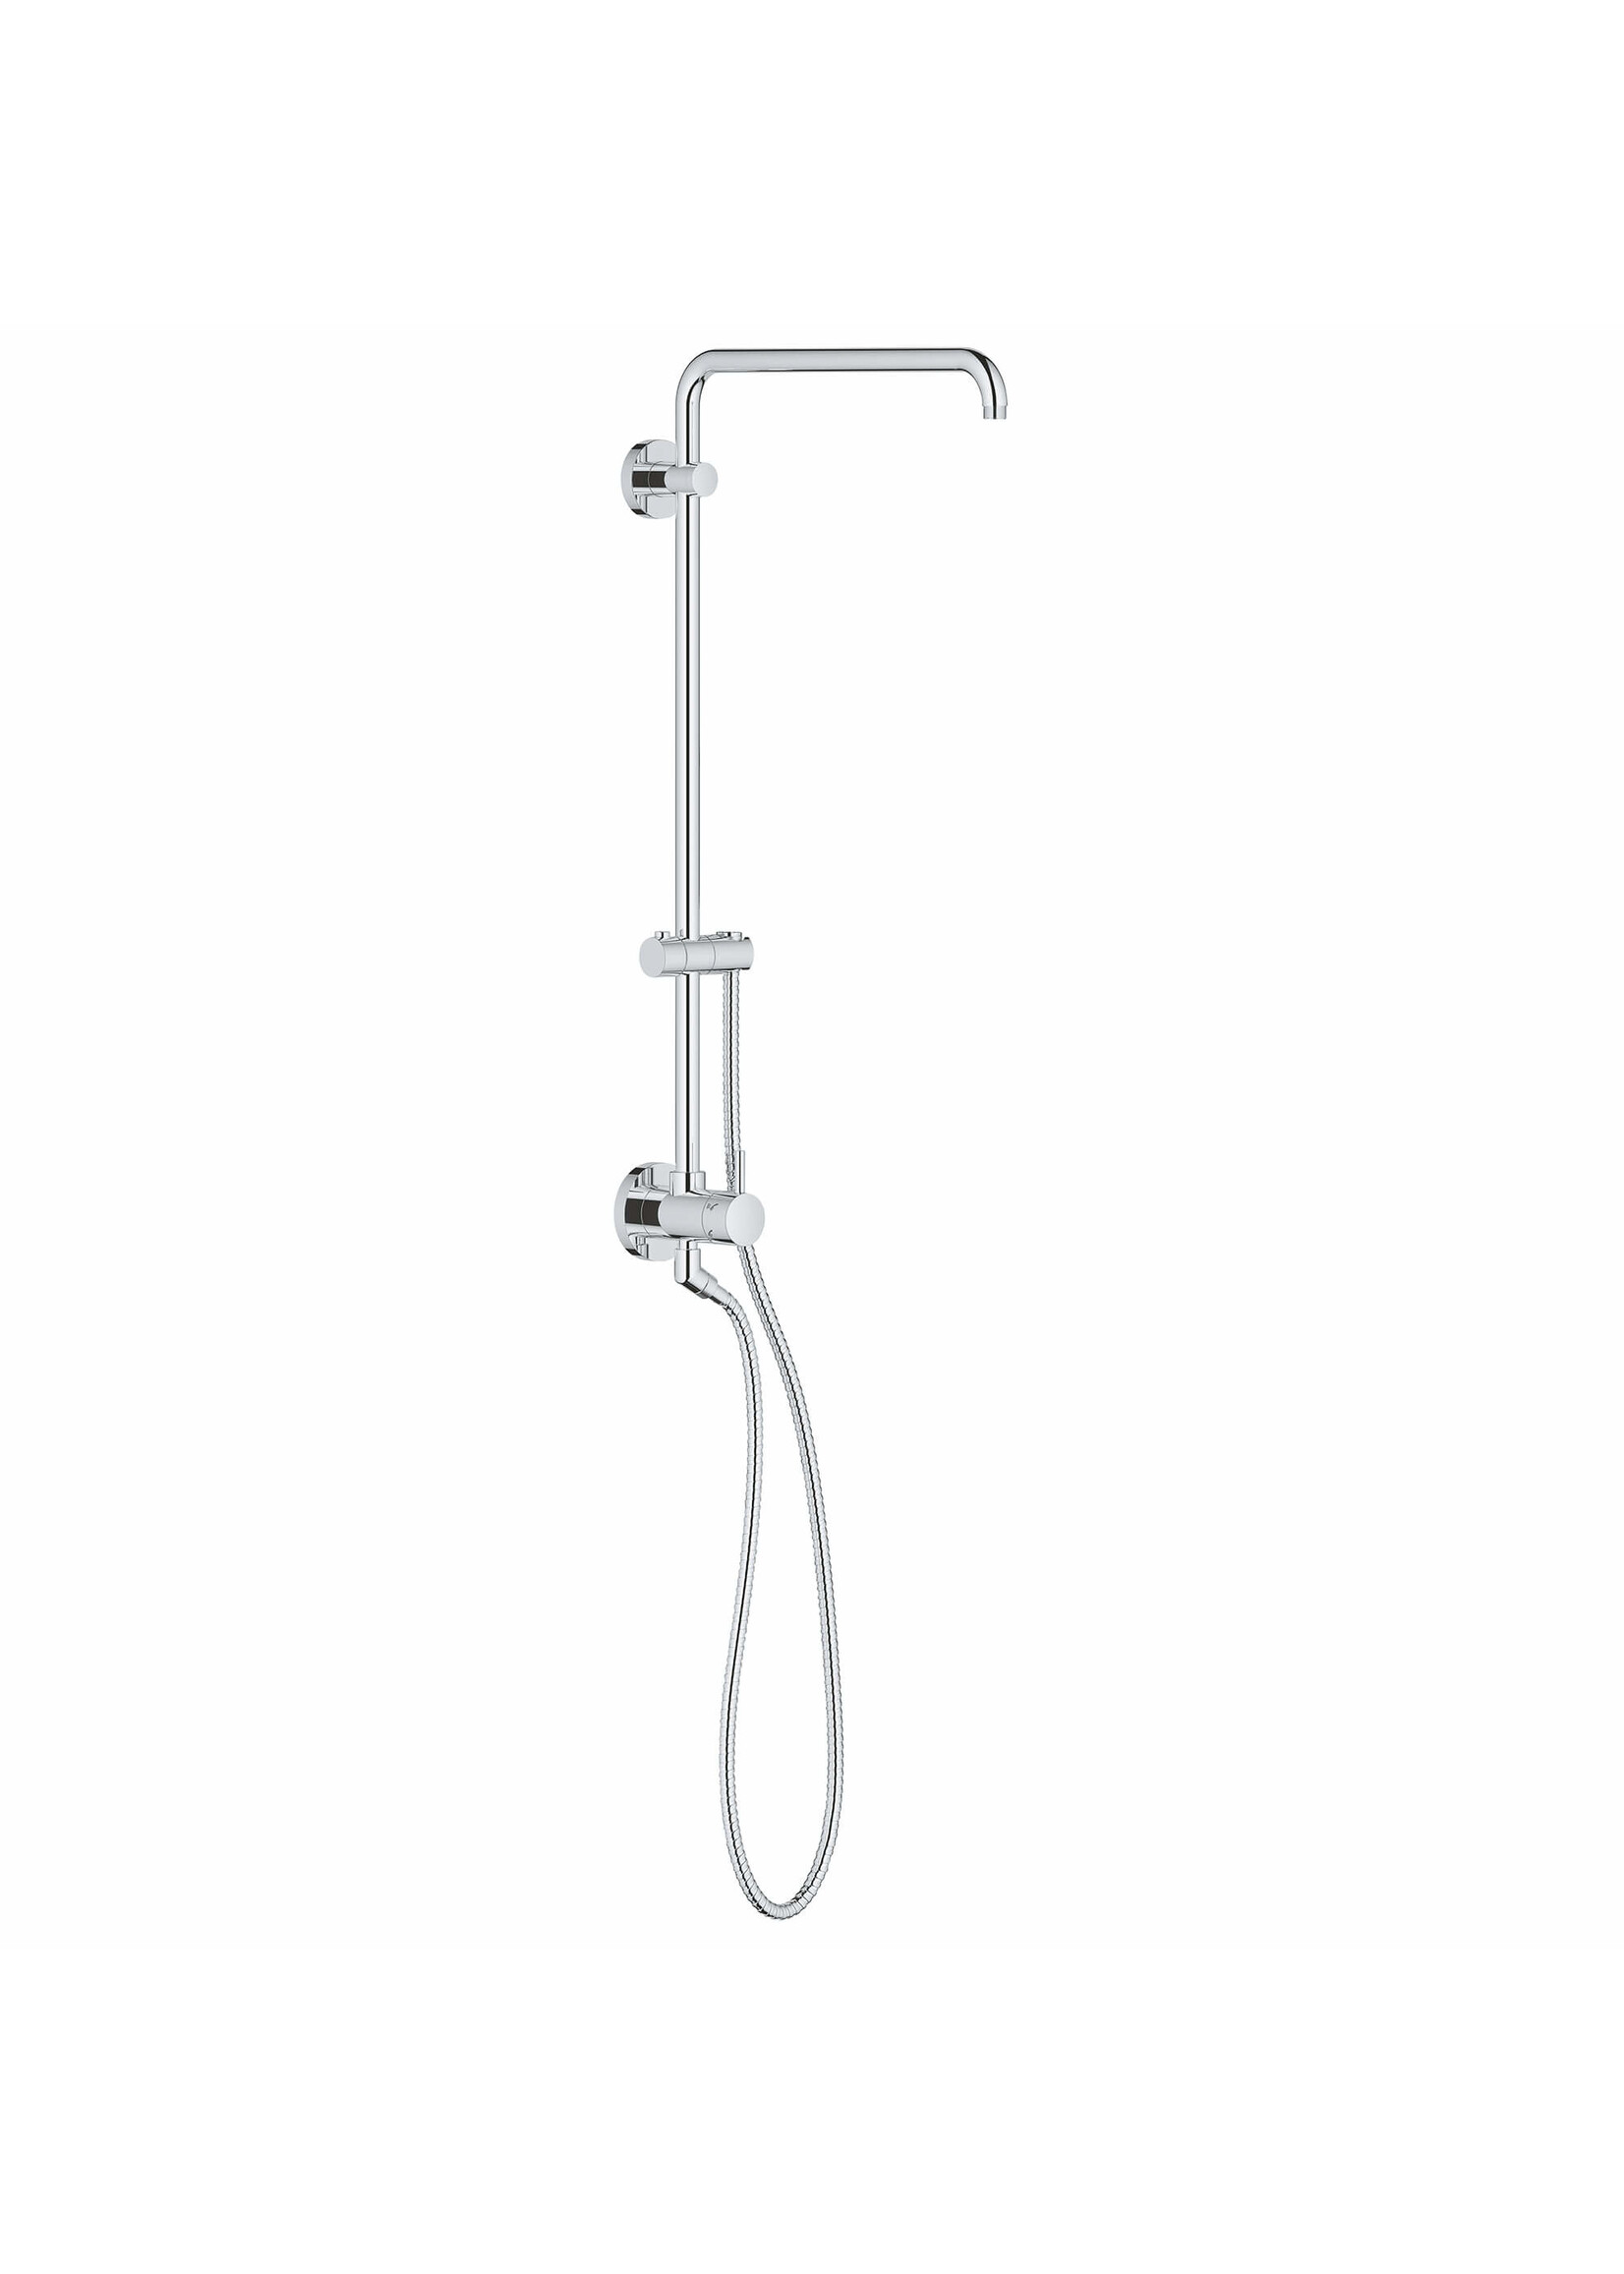 Grohe Grohe Retro-fit™ 25'' Shower System,17 11 ⁄16'' Arm Crome